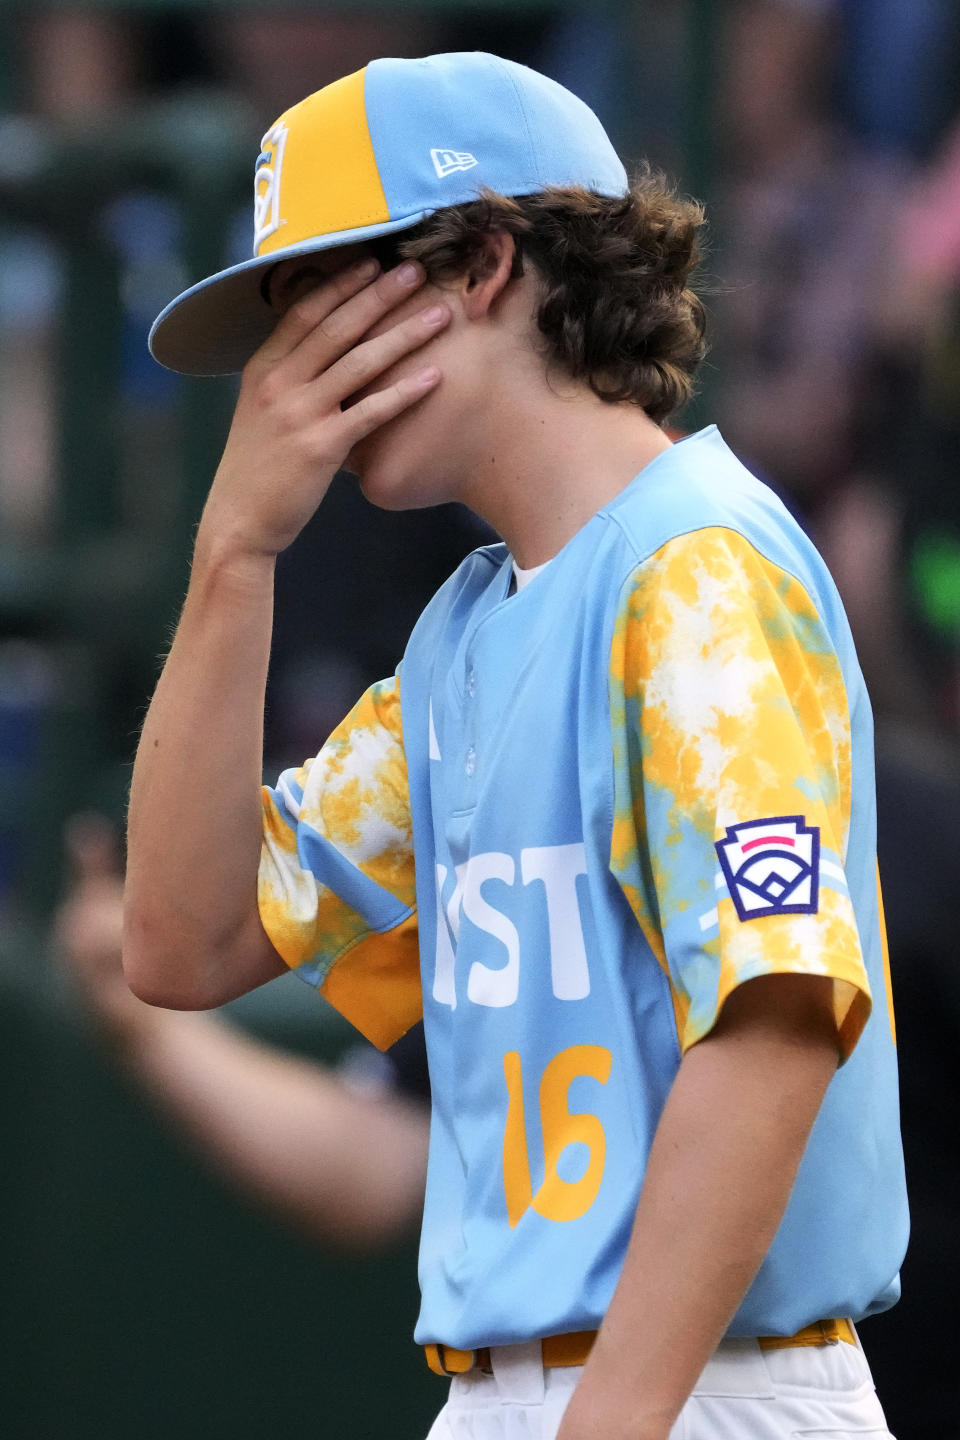 El Segundo, Calif.'s Ollie Parks collects himself on the mound during the first inning of the team's baseball game against New Albany, Ohio, at the Little League World Series in South Williamsport, Pa., Thursday, Aug. 17, 2023. (AP Photo/Gene J. Puskar)